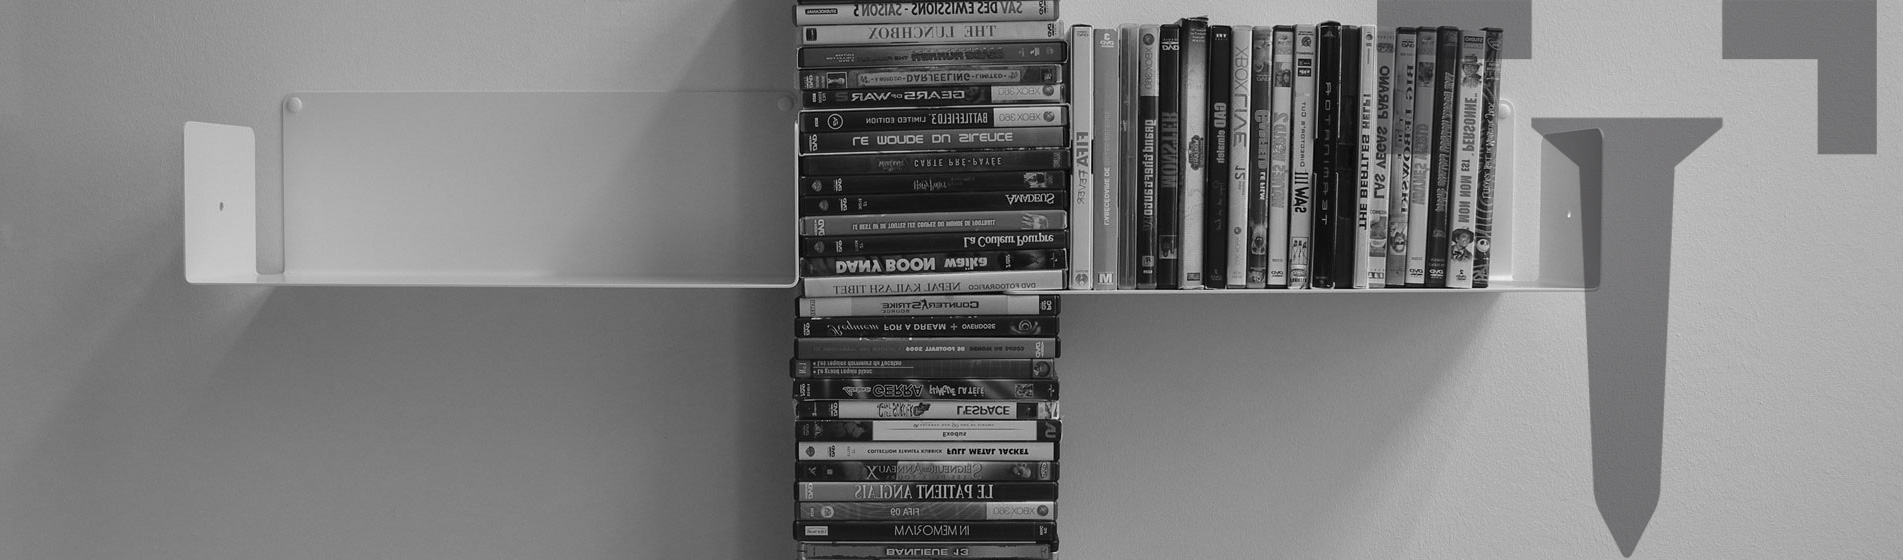 Range dvd fixations invisibles